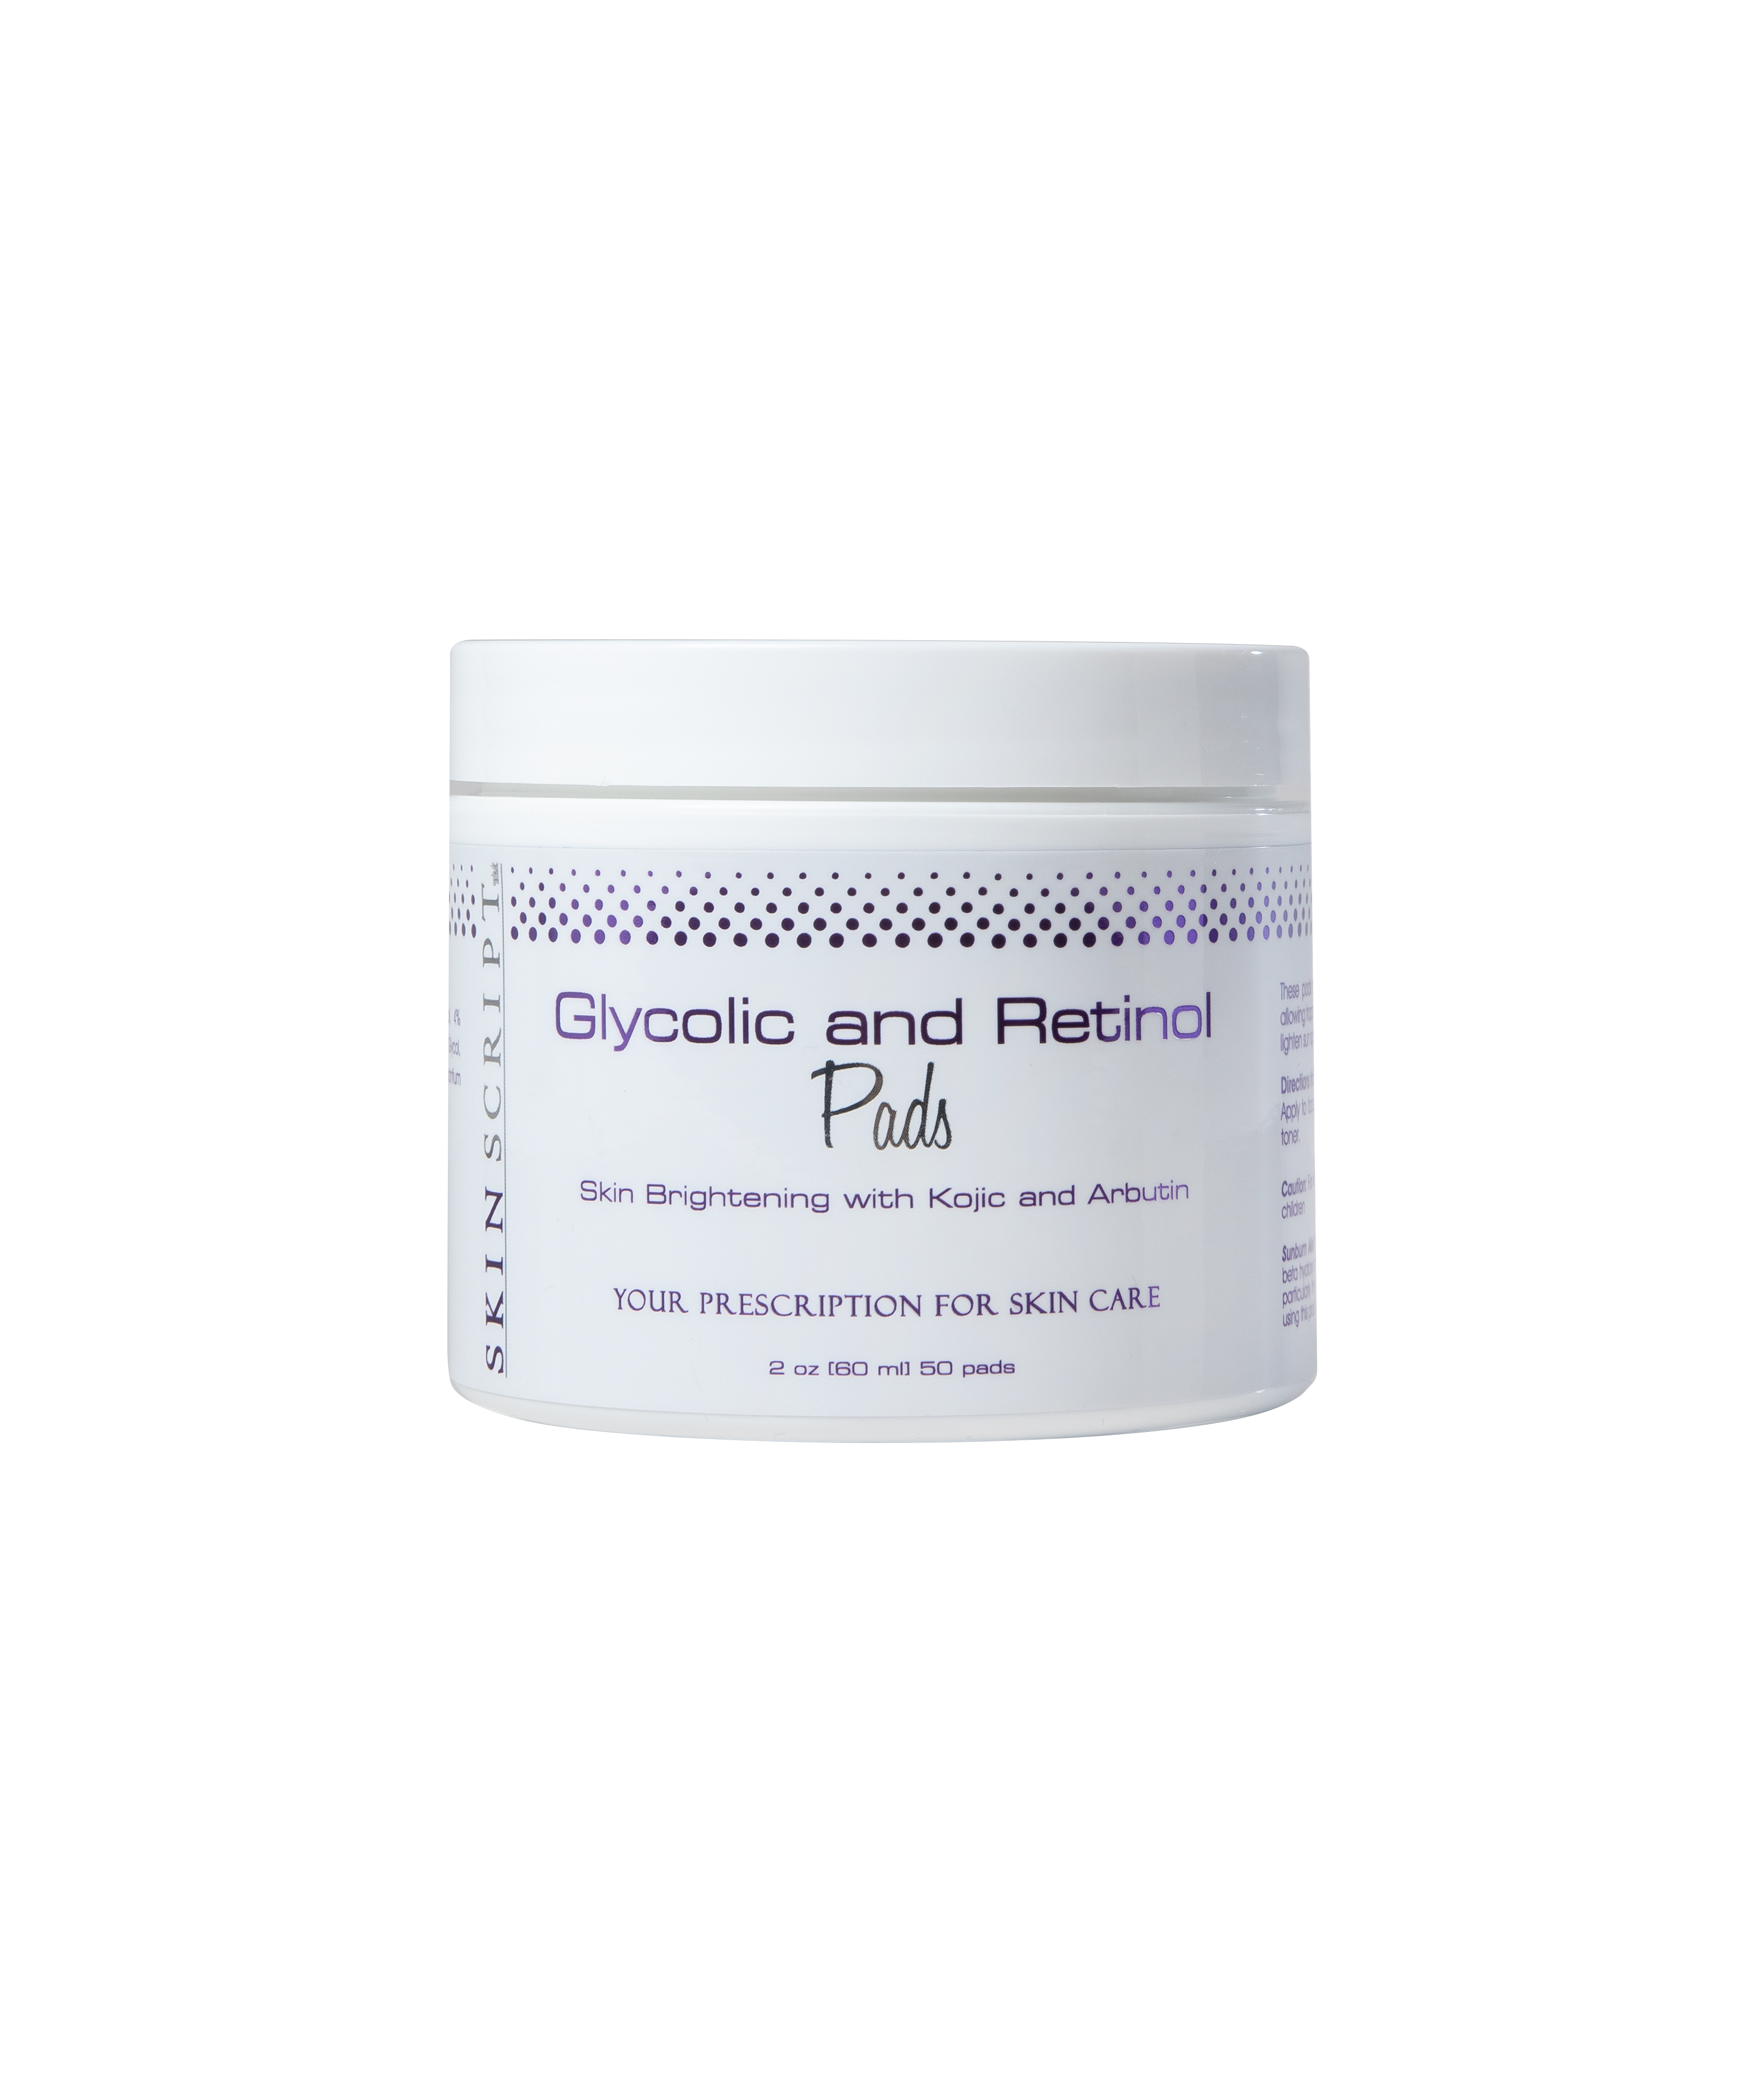 Glycolic and Retinol Pads- Combat Blemishes